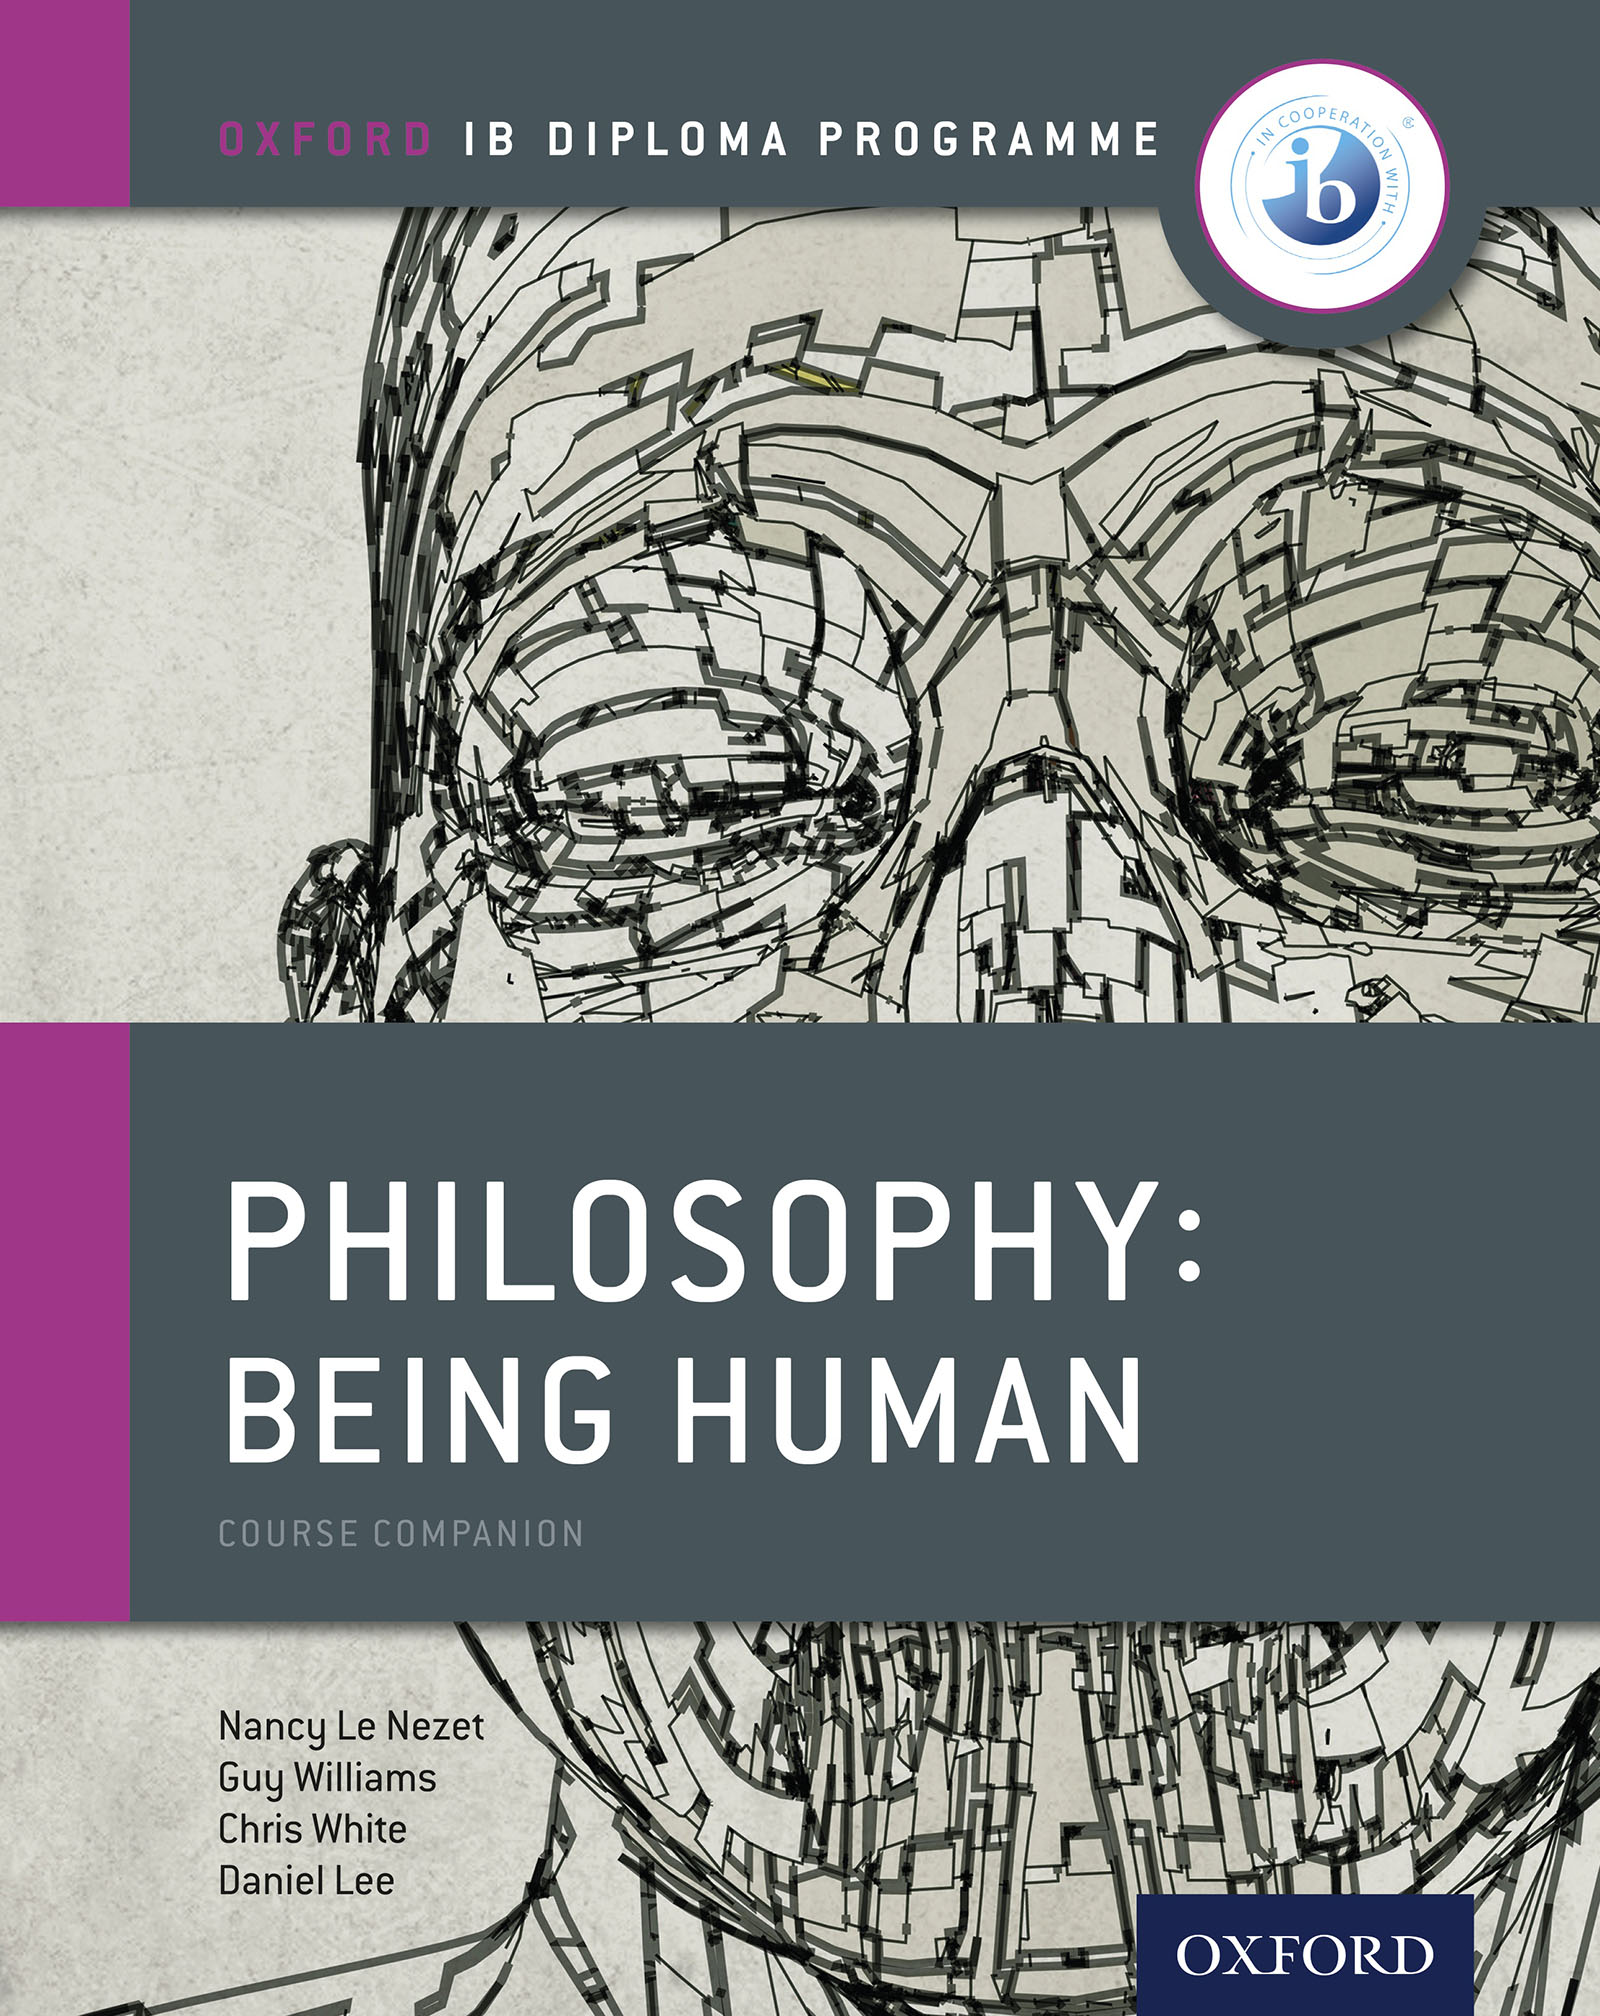 Oxford IB Diploma Programme: Philosophy: Being Human Course Companion